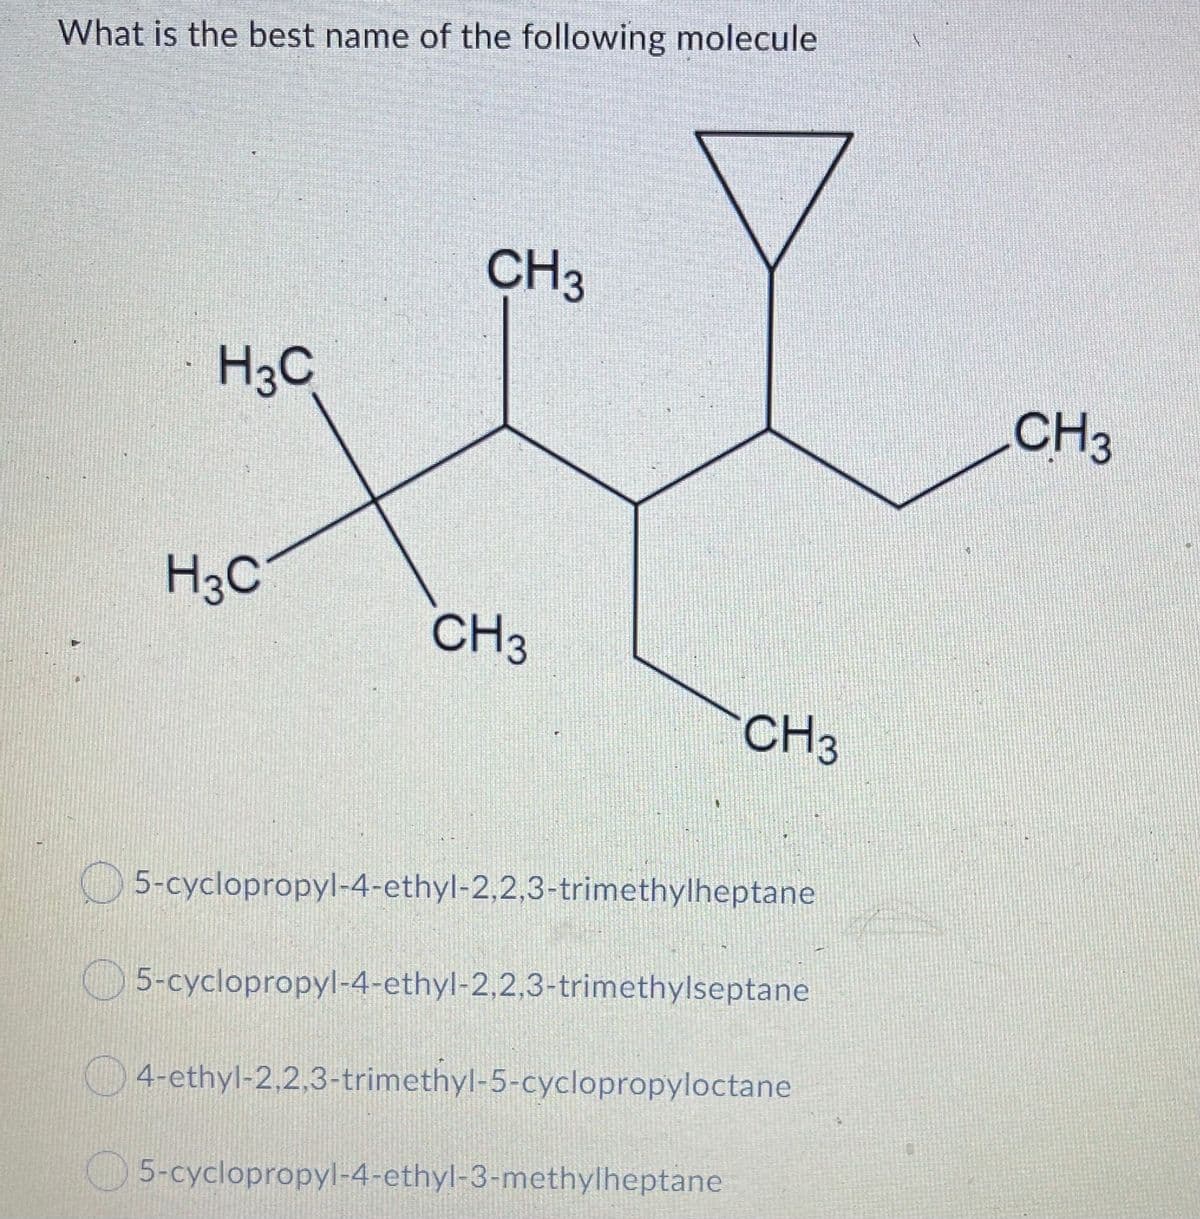 What is the best name of the following molecule
CH3
H3C
CH3
H3C
CH3
CH3
5-cyclopropyl-4-ethyl-2,2,3-trimethylheptane
5-cyclopropyl-4-ethyl-2,2,3-trimethylseptane
4-ethyl-2,2,3-trimethyl-5-cyclopropyloctane
5-cyclopropyl-4-ethyl-3-mcthylheptane
